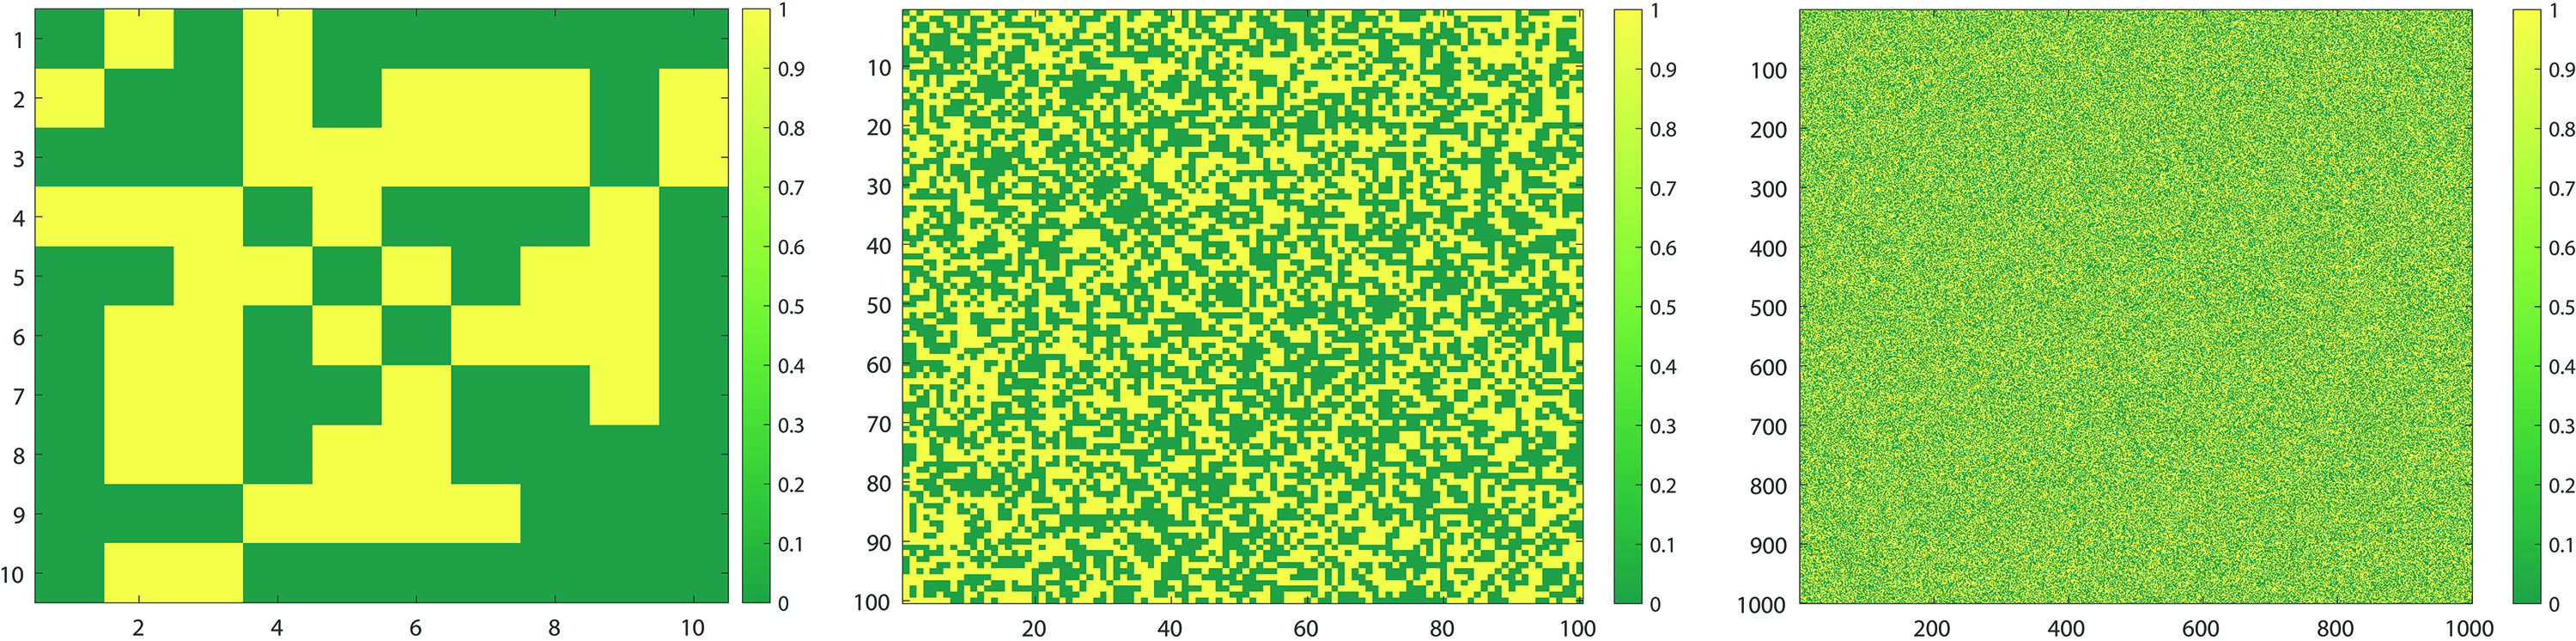 &lt;strong&gt;Figure 1.&lt;/strong&gt; Pixel plots for random graphs on \(n = 10,100,\) and \(1000\) vertices that were generated by the Erdős–Rényi graphon \(W(x,y) = 1/2\). Yellow squares represent an edge weight of \(1\) between vertices \(x_k = (k - 1)/n\) and \(x_j = (j - 1)/n\), while green represents the absence of an edge. Figure courtesy of Jason Bramburger.